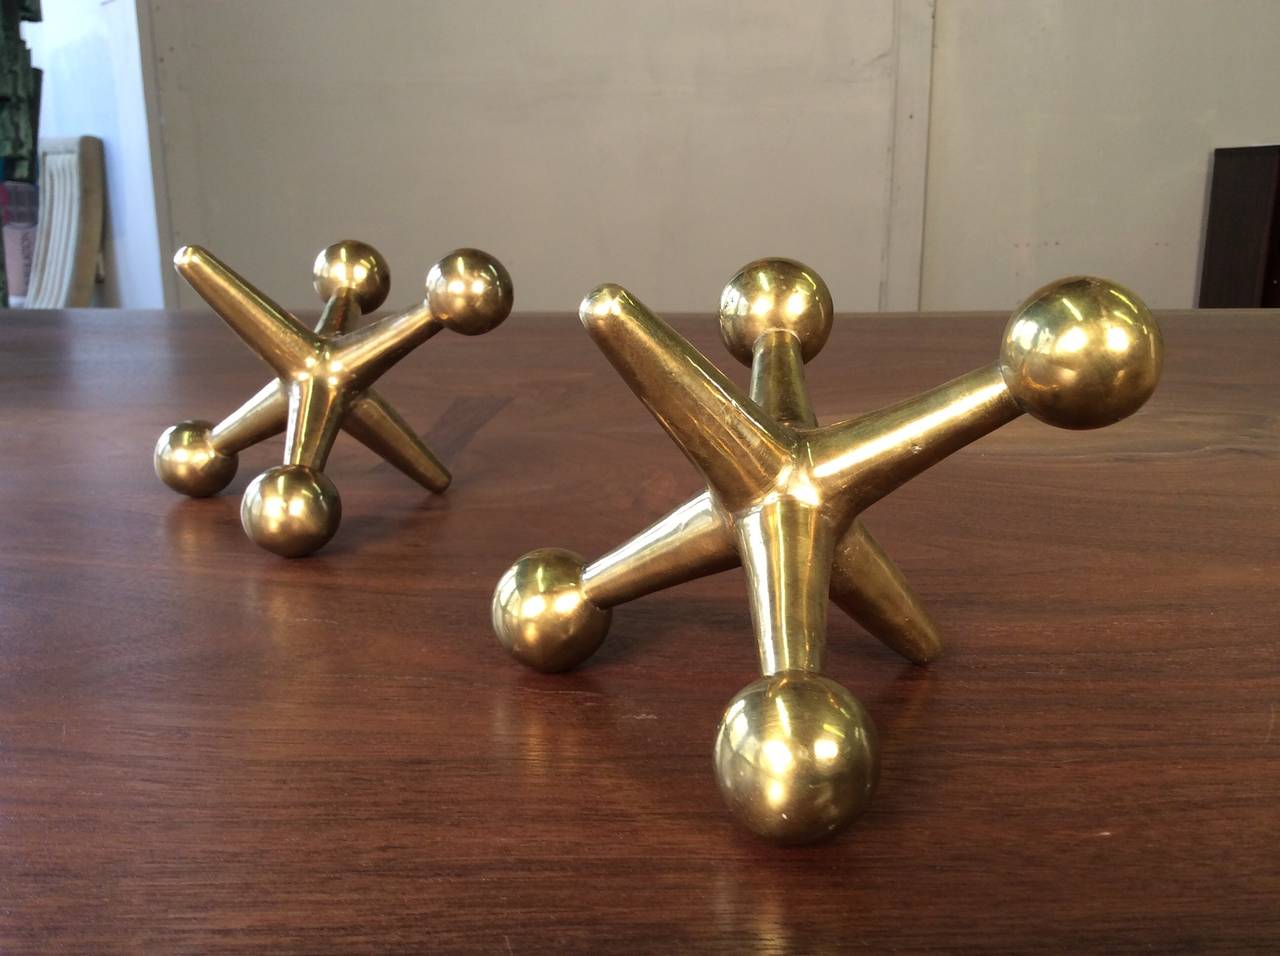 American Best Pair of Oversized Solid Brass Jacks Bookends or Object